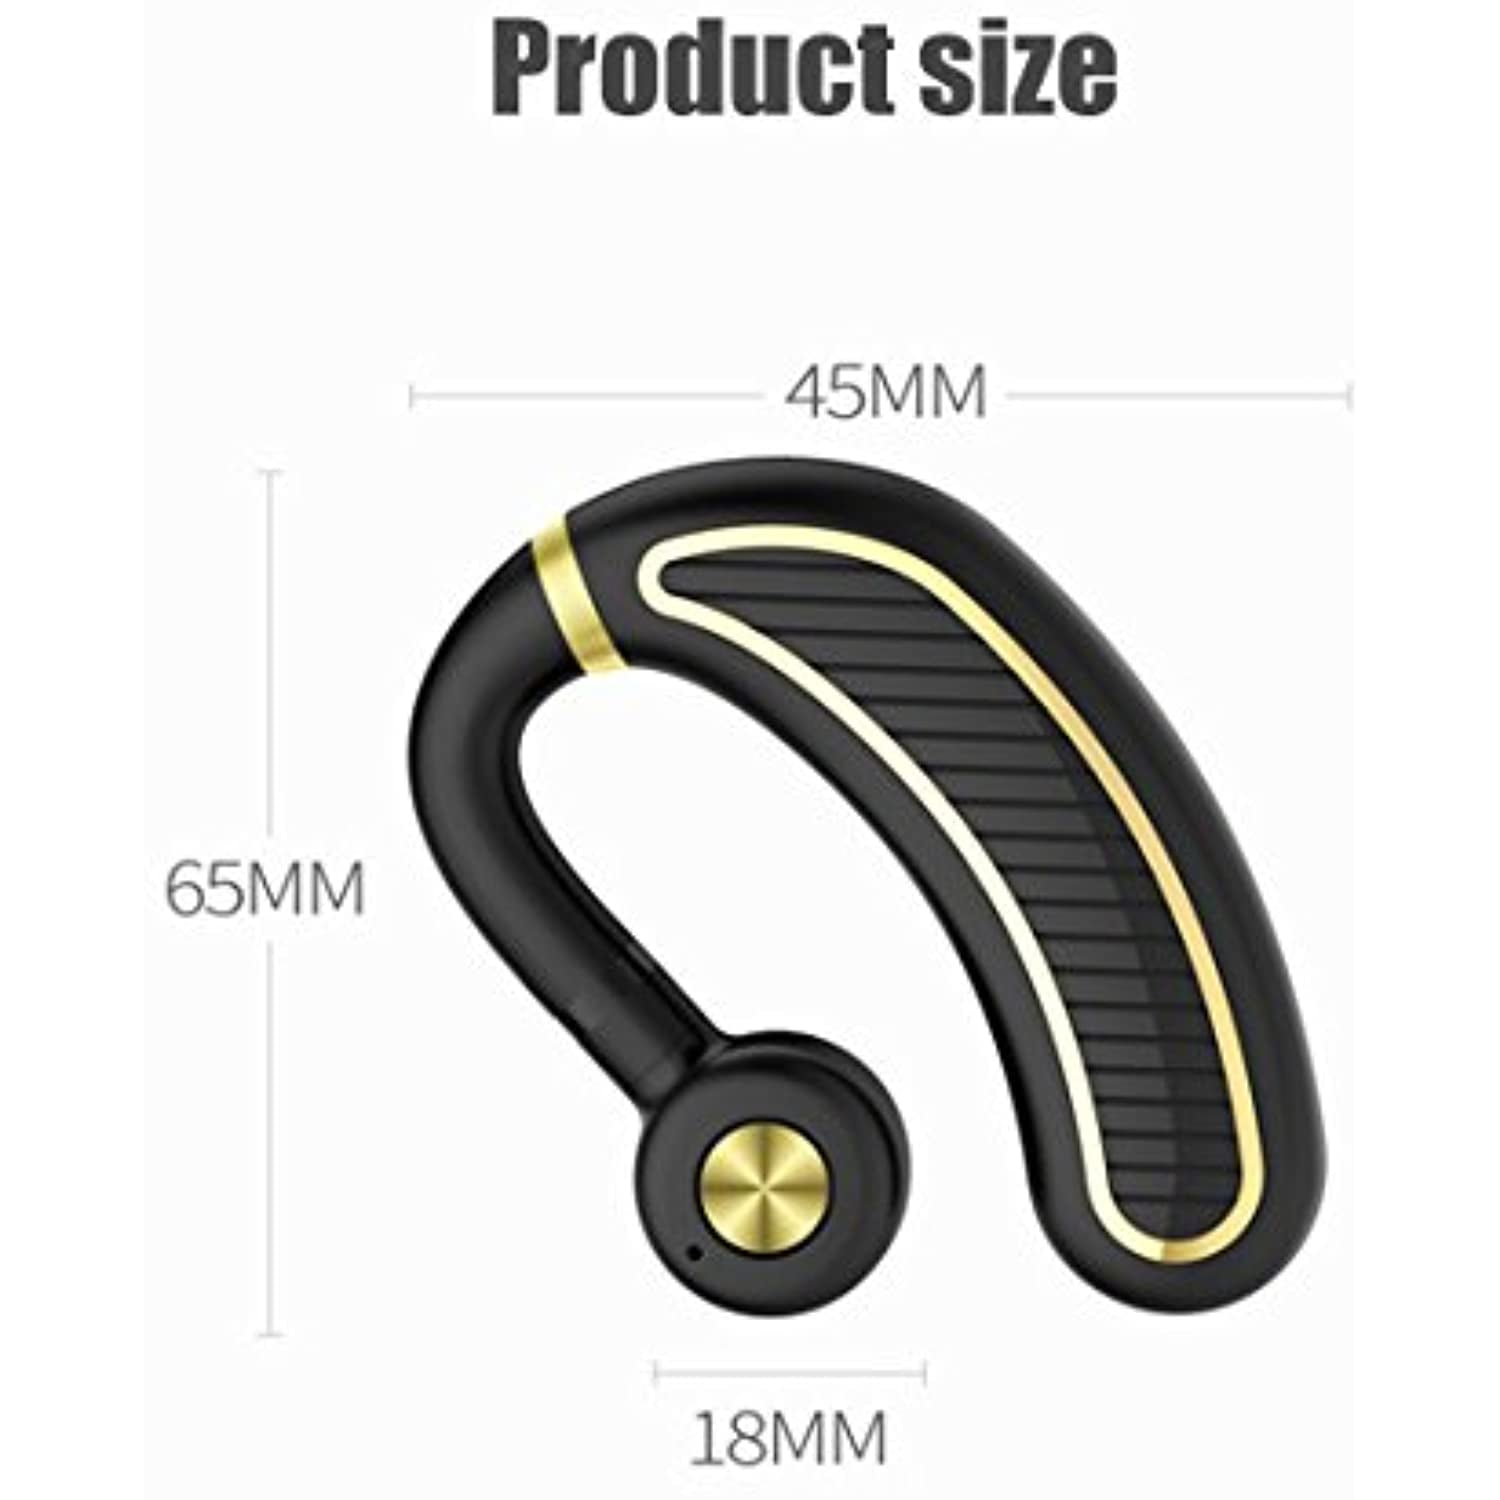 Bluetooth Headset,Wireless Bluetooth 4.1 Business Headphone Earphone 300mAh Super Long Standby Earpiece with Mic,Sweatproof,Noise Reduction,Mute Switch for Cell Phone Truck Driver,Office,Sport Skype 